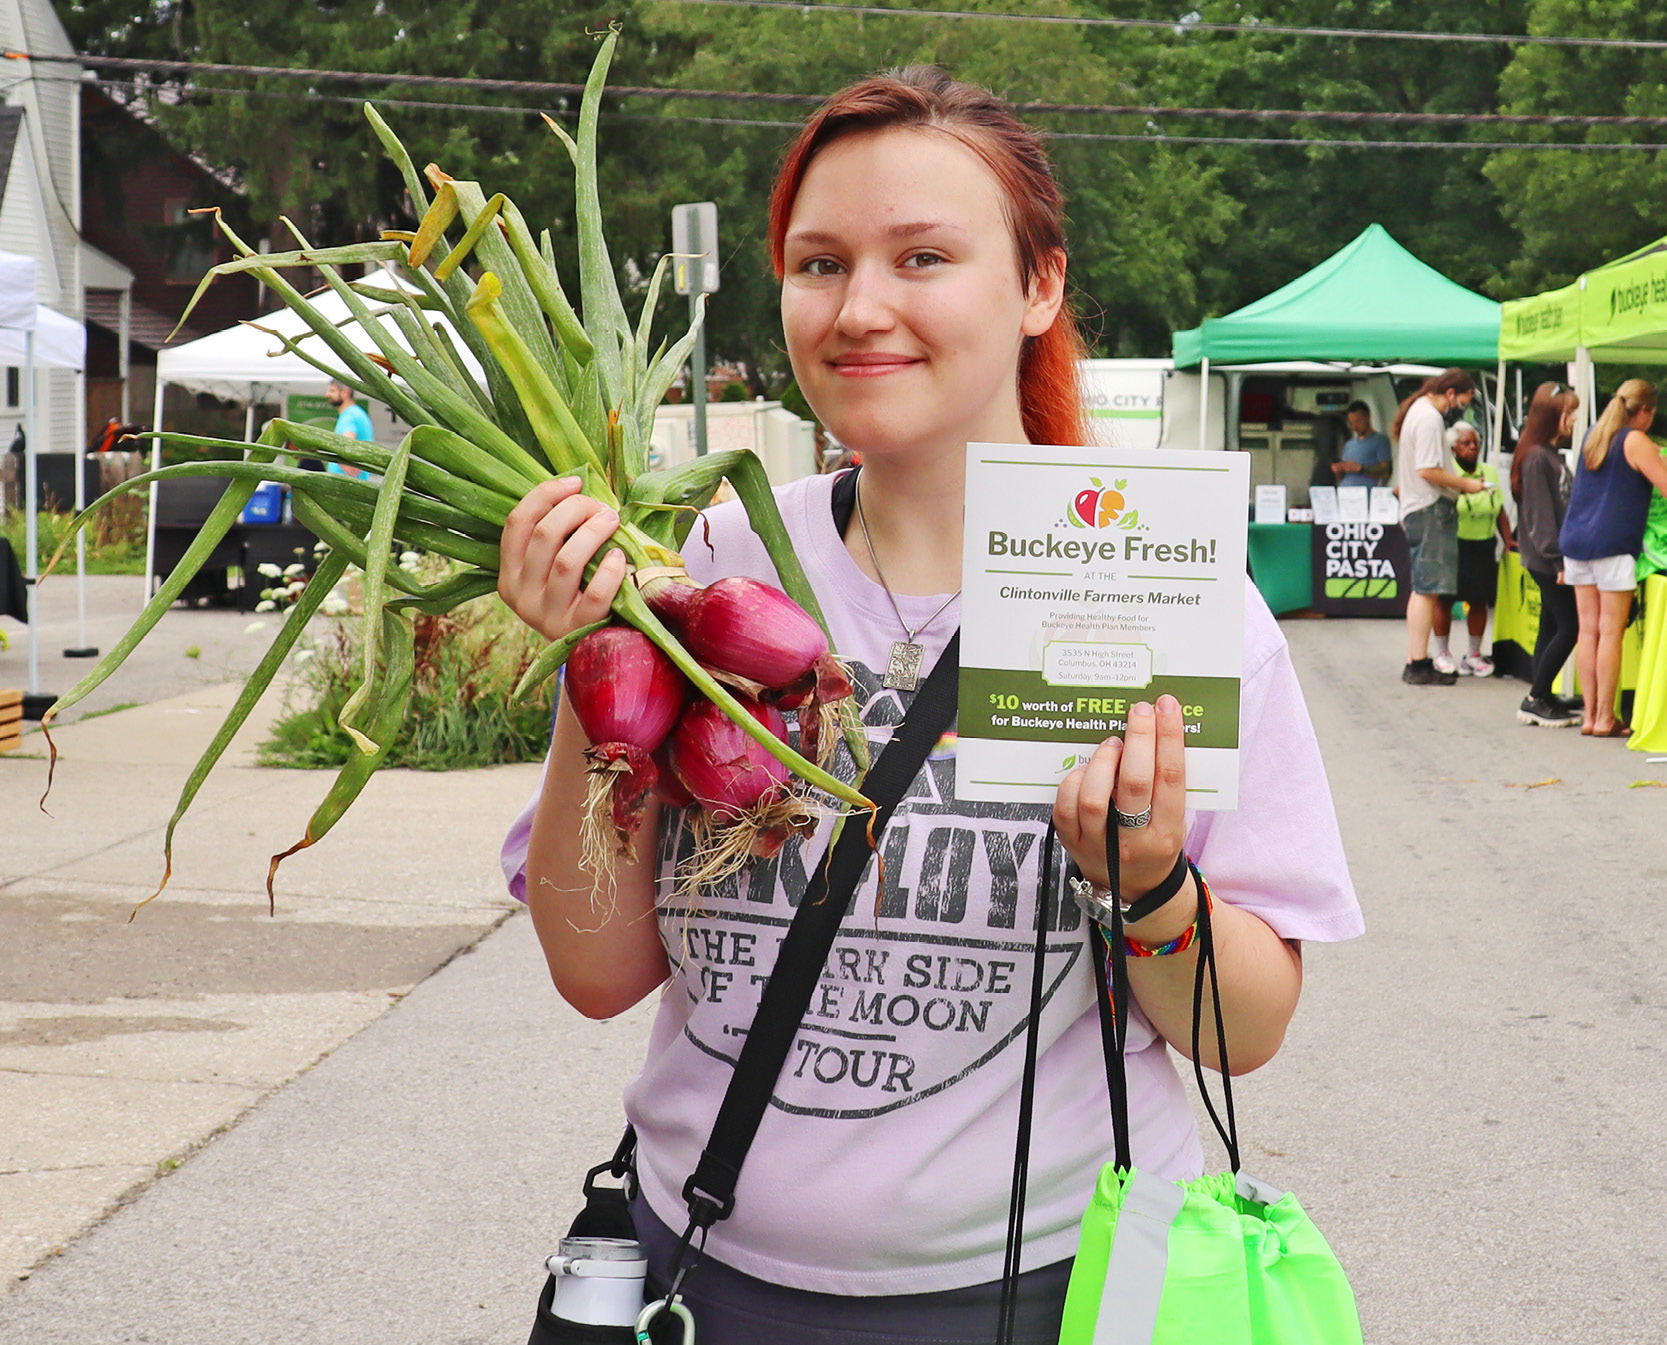 A woman holds fresh produce at the farmers market.